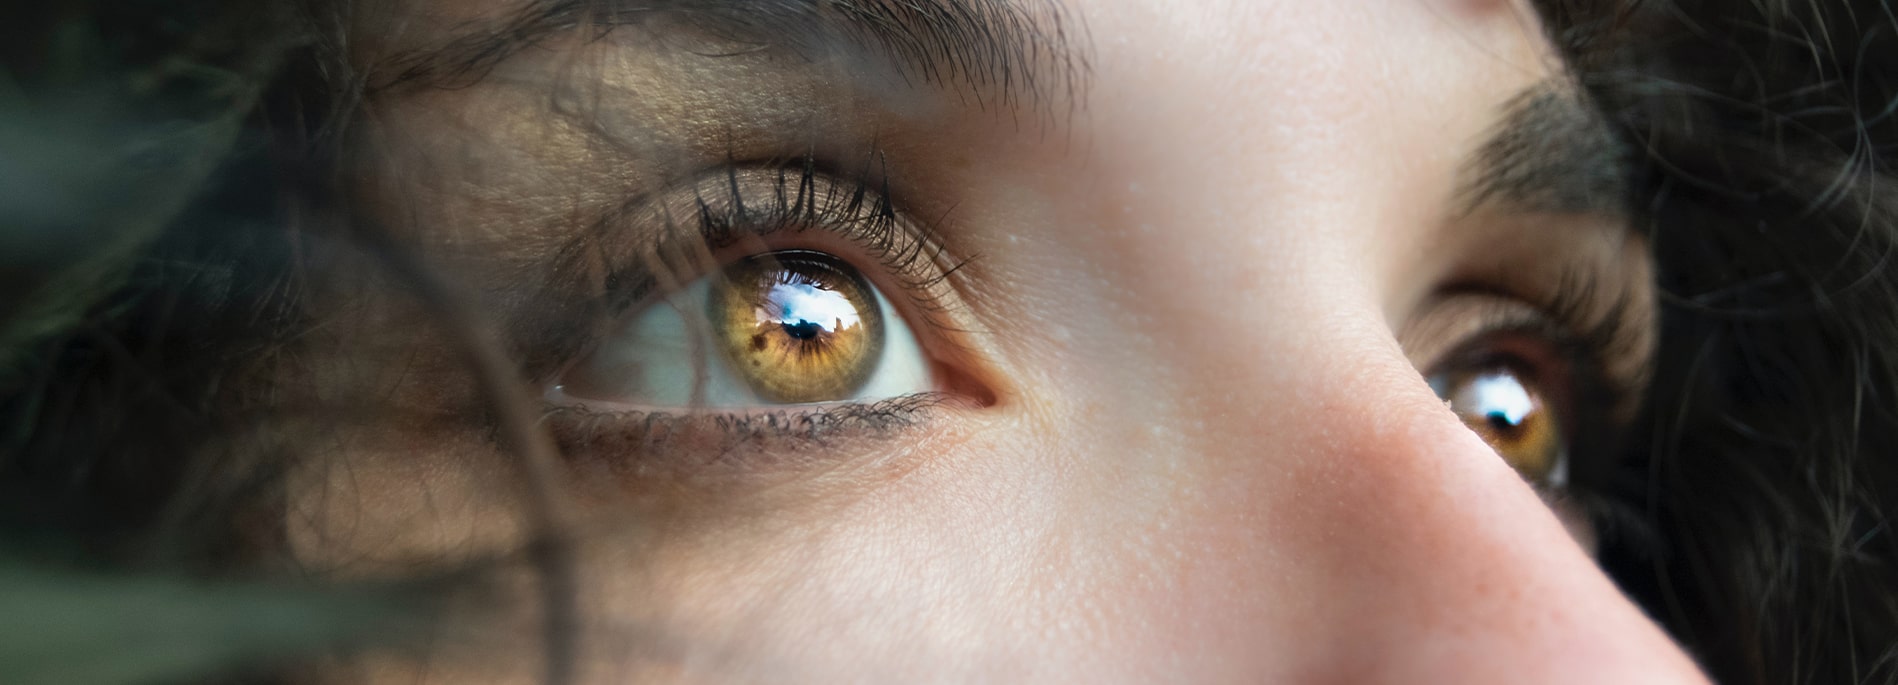 Amber Eyes Shown in Rare and Stunning Photos